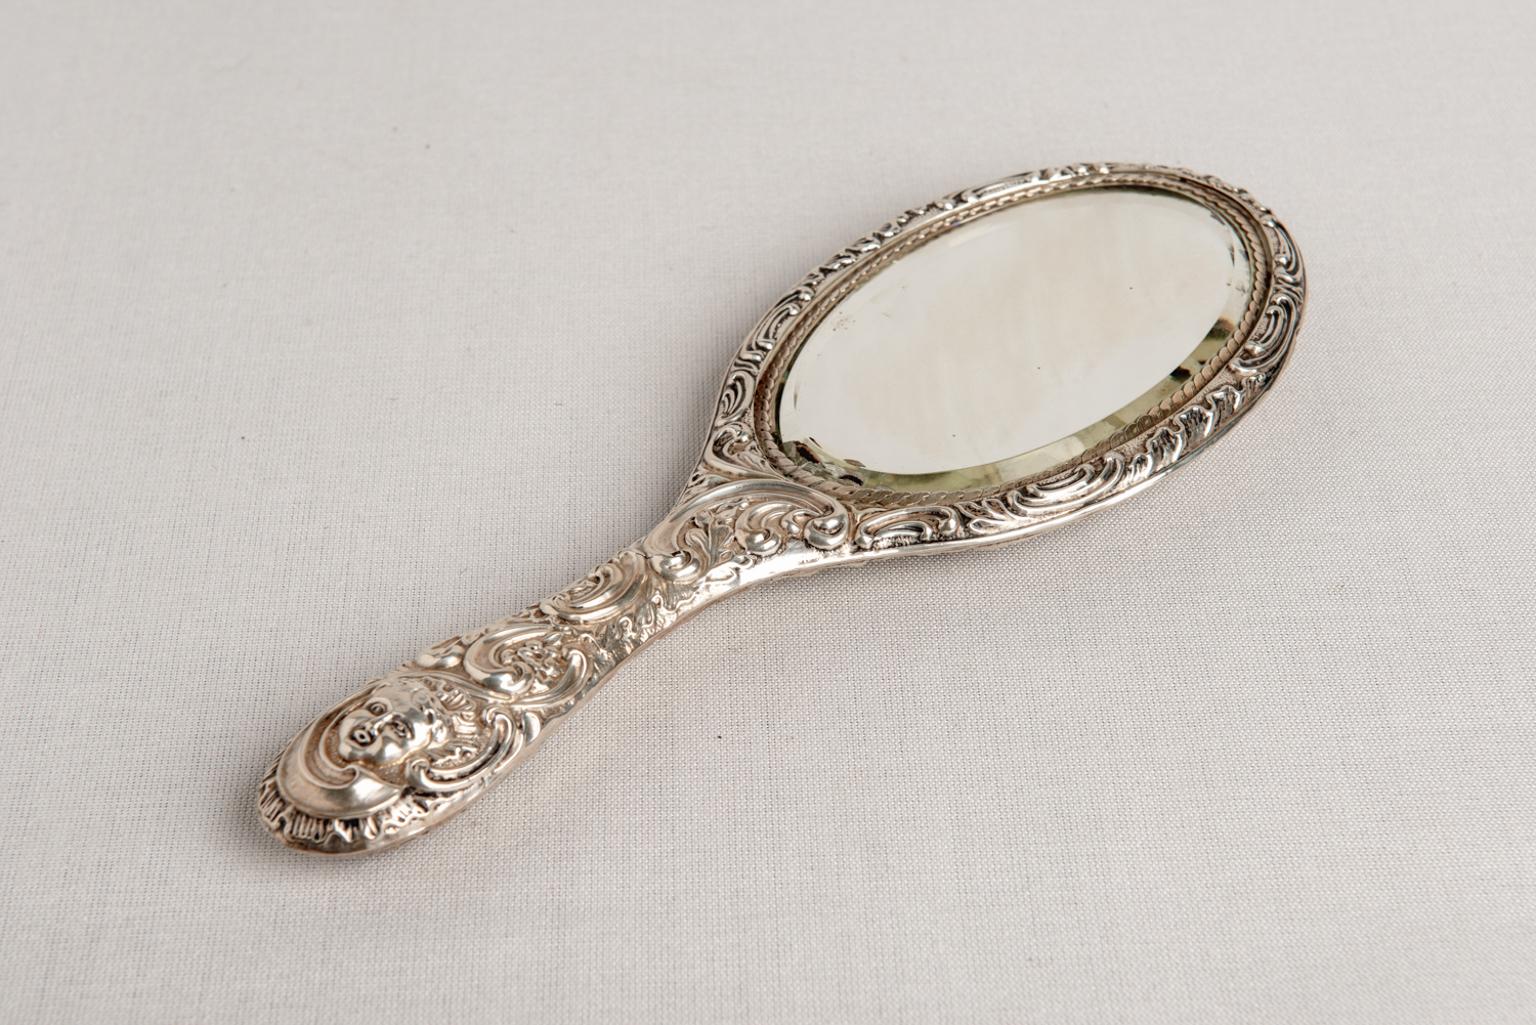 English silver vanity mirror with handle - dated (as usual in England) 1899 - Chester punches -
A beautiful idea for a Christmas gift for Your wife or Your beloved daughter or Your mother ..or Your grand-mother ! For every woman.
A/2115.